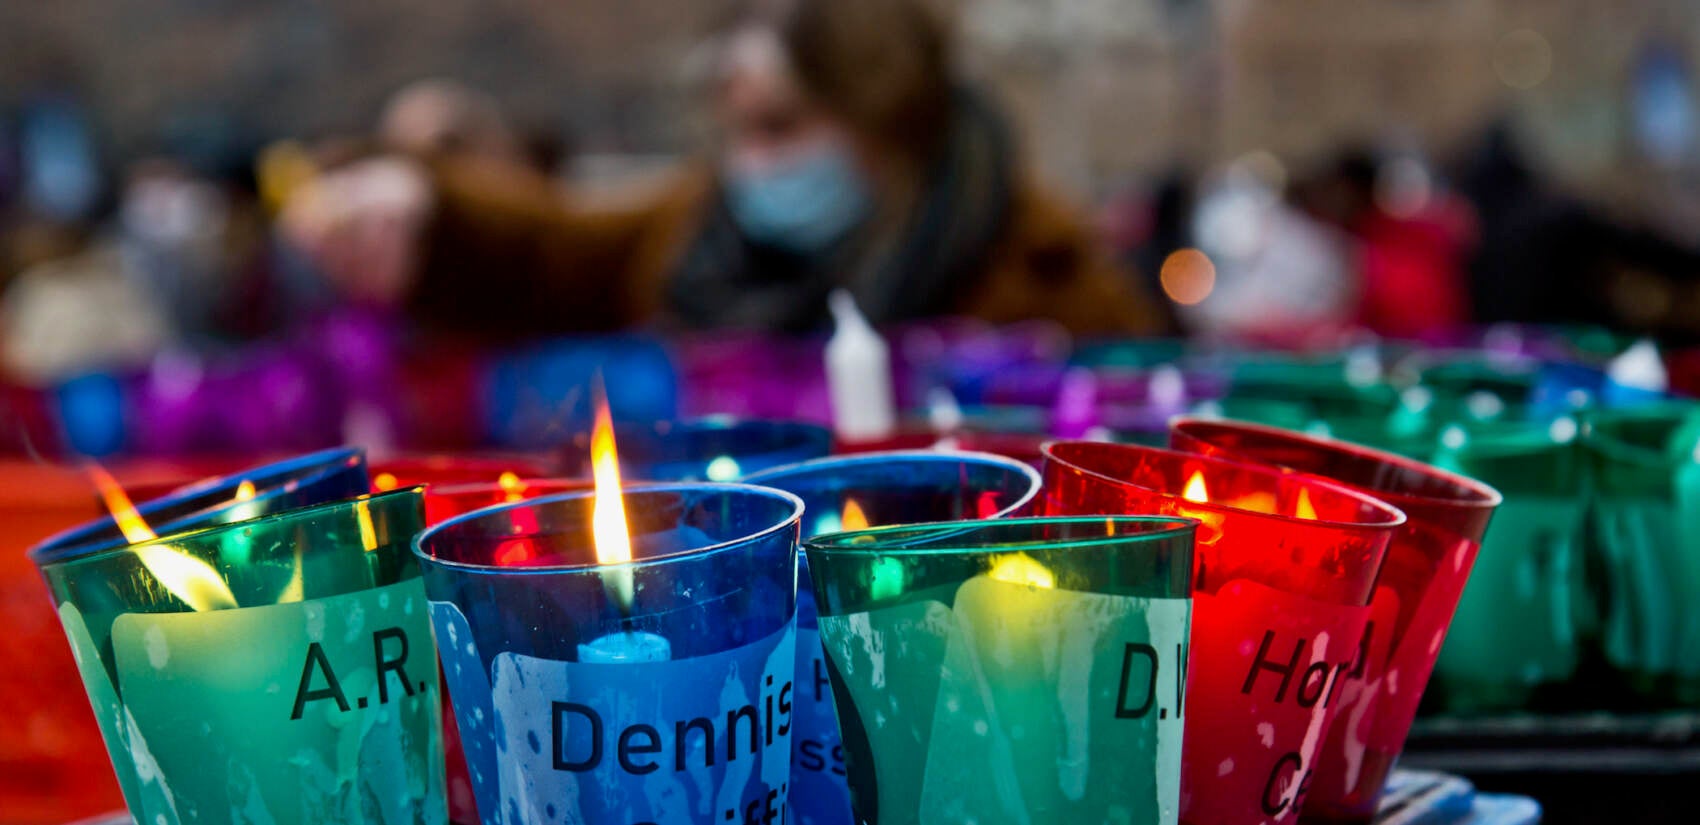 Over 300 votives bore the names of people who experienced homelessness, lost in 2021 at Homeless Memorial Day at Thomas Paine Plaza in Philadelphia on Dec. 21, 2021